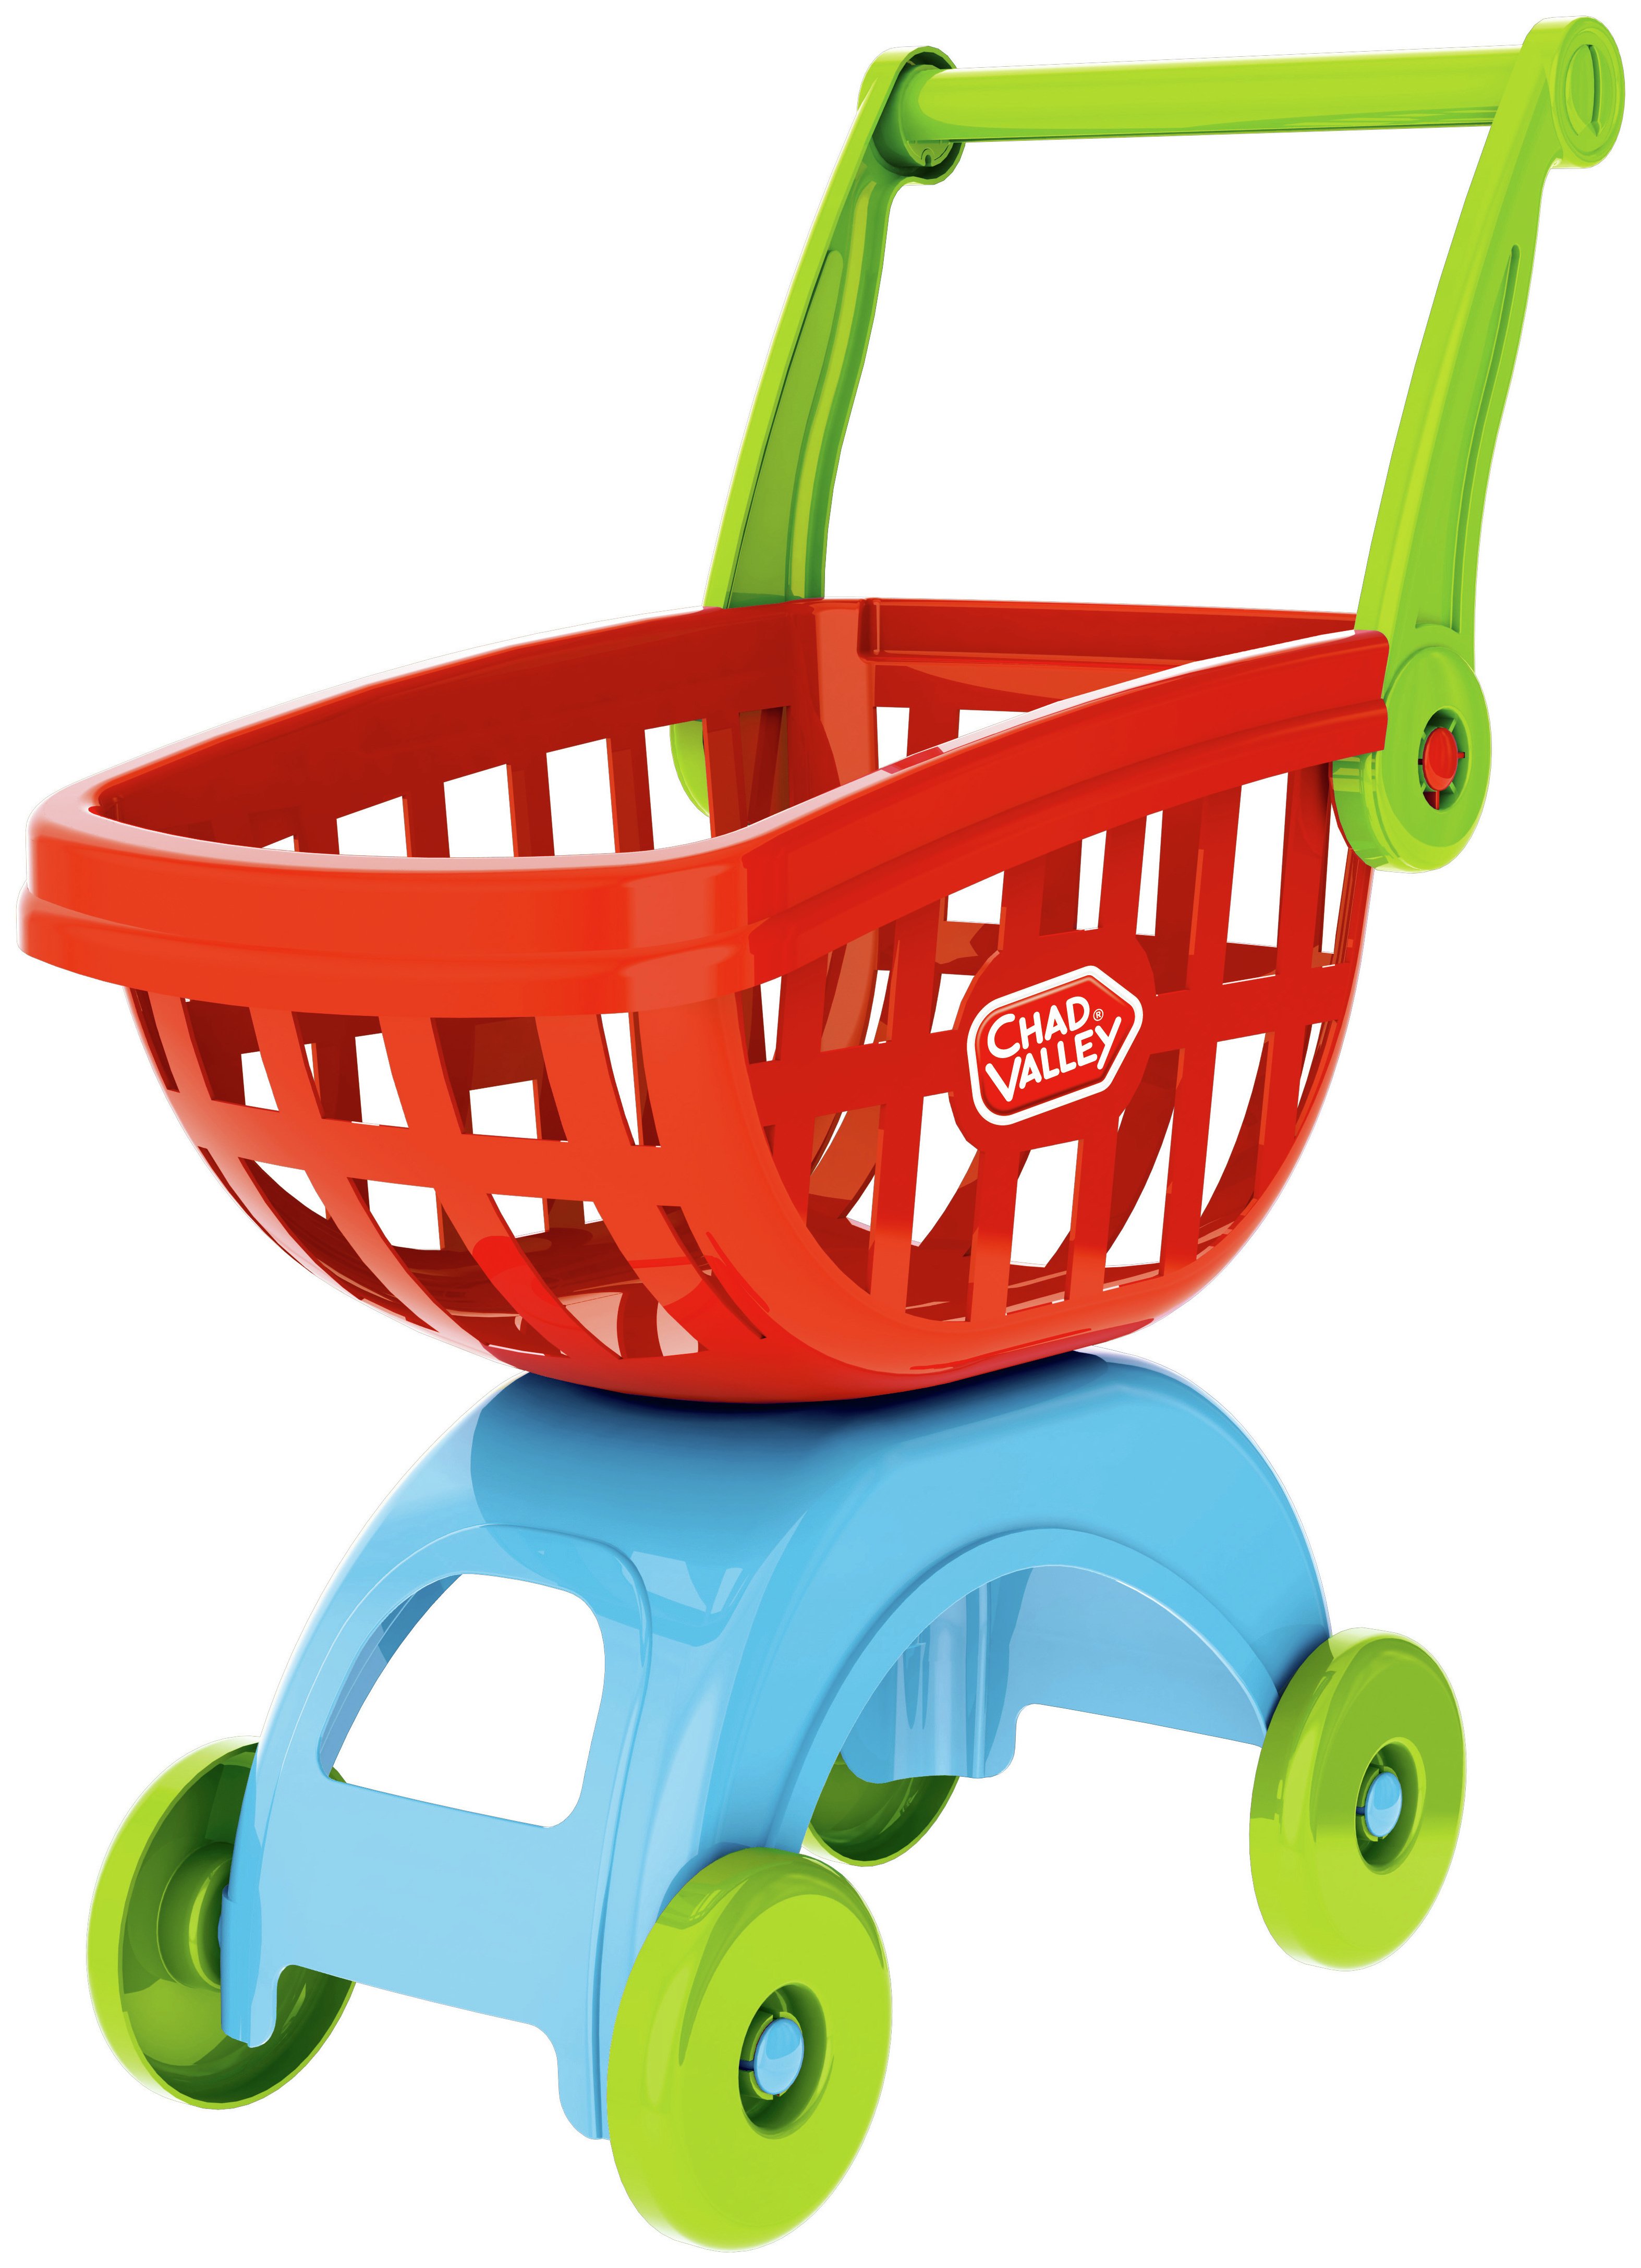 Chad Valley Shopping Trolley and Accessories